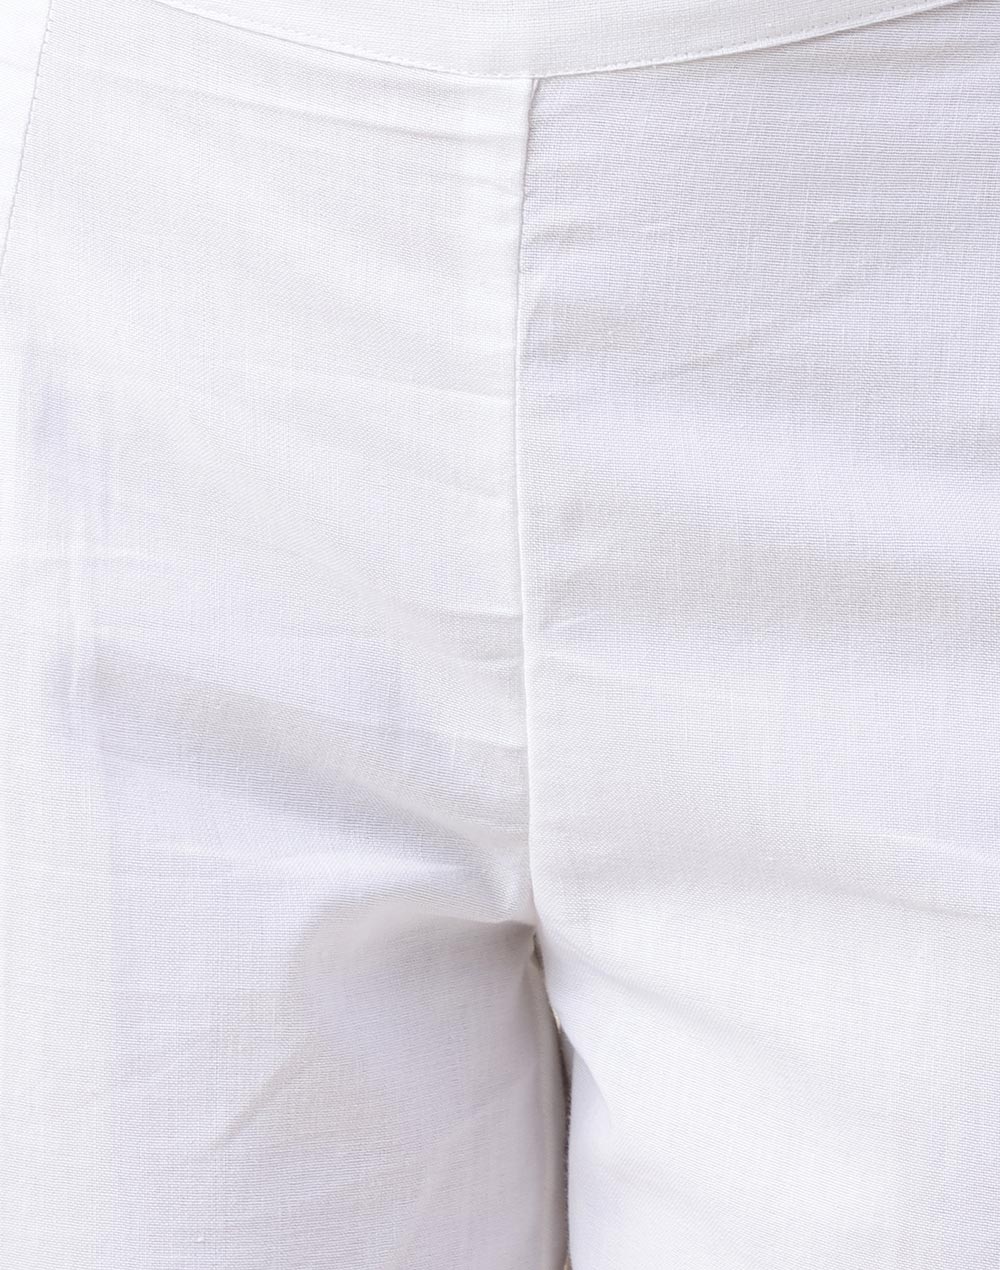 White Cotton Slim Fit Casual Pant